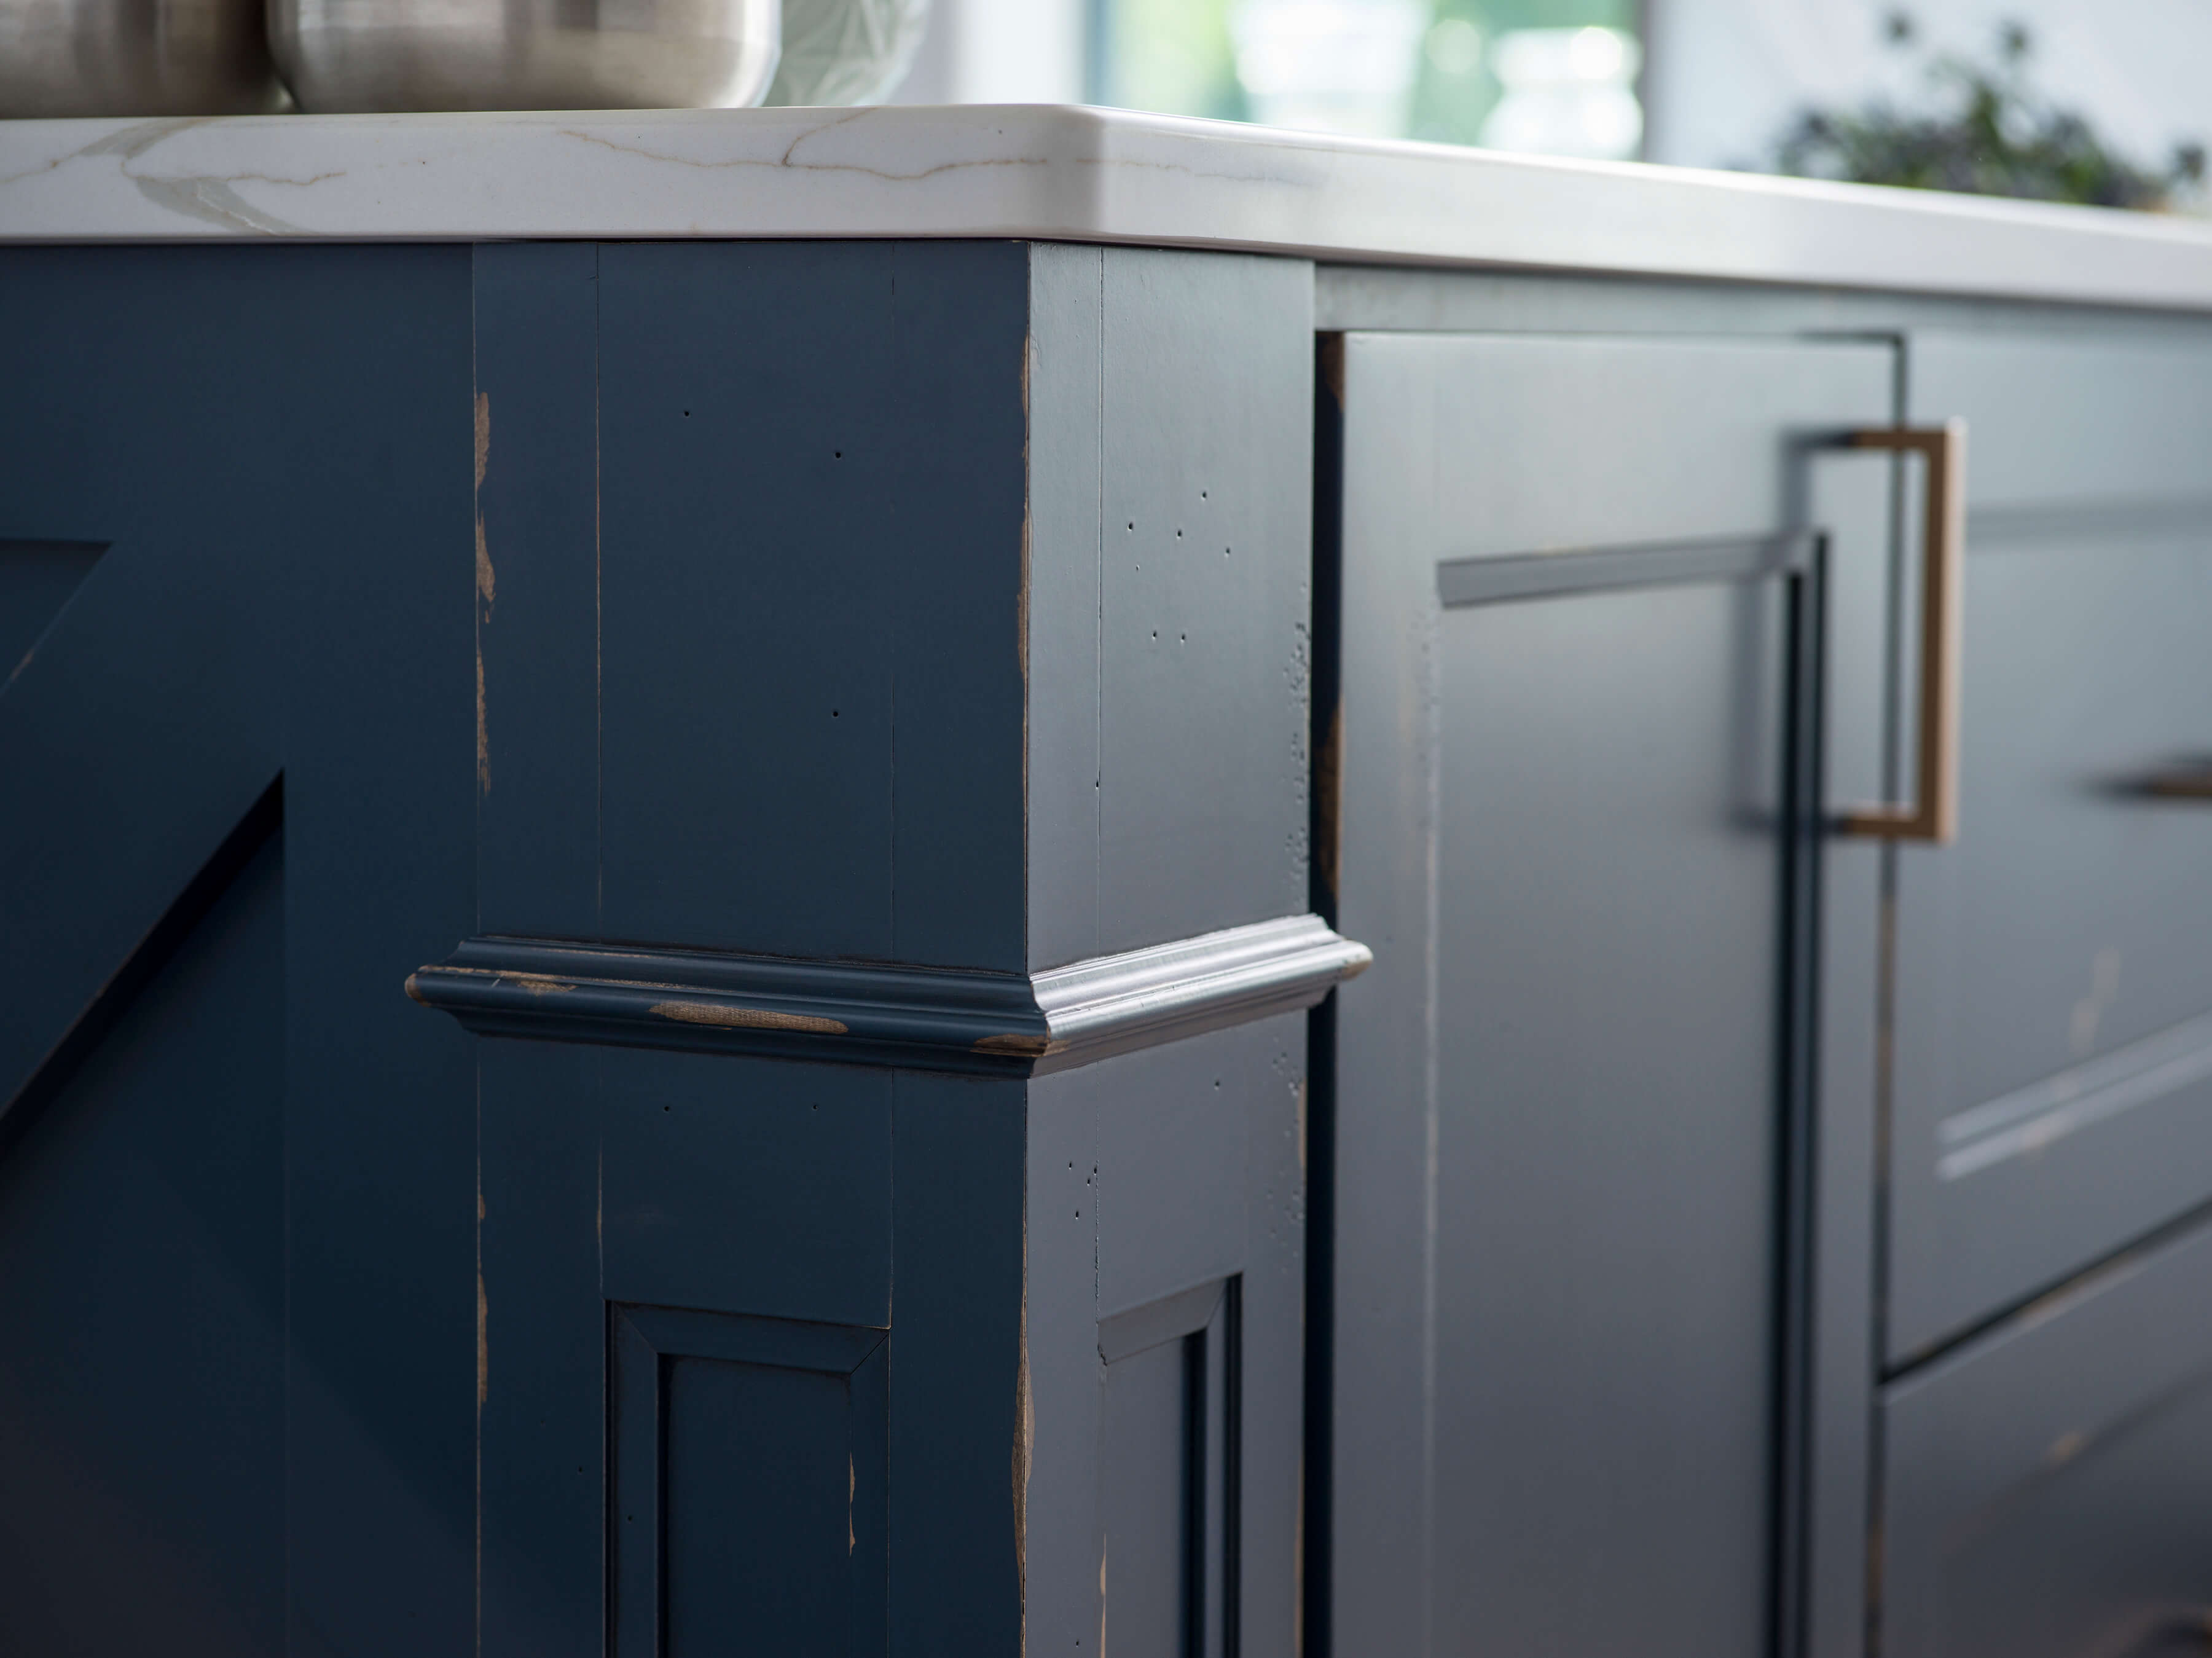 A kitchen island with a beautiful distressed paint finish with Dura Supreme's Heritage Paint finish in a custom Navy blue color.